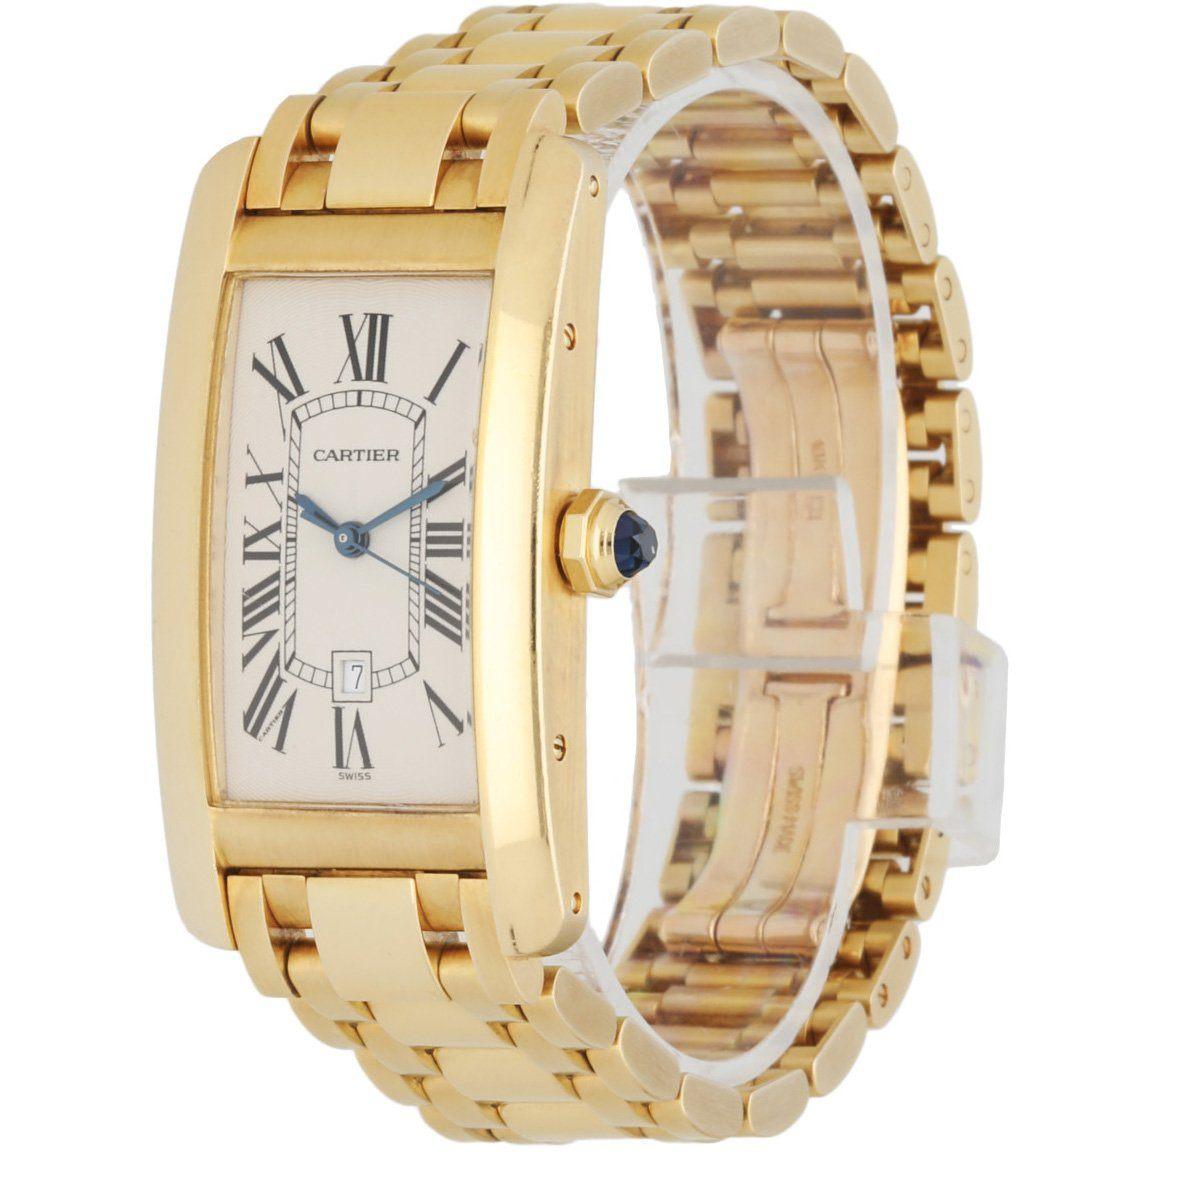 Cartier Tank Americaine W26035K2 /1725Â men's watch.Â 23mm 18k Yellow Gold case withÂ 18K Yellow Gold bezel. Off-White dialÂ with Blue steel hands and Roman numeral hour markers.Â Minute markers on the inner dial.Â Date display at the 6 o'clock